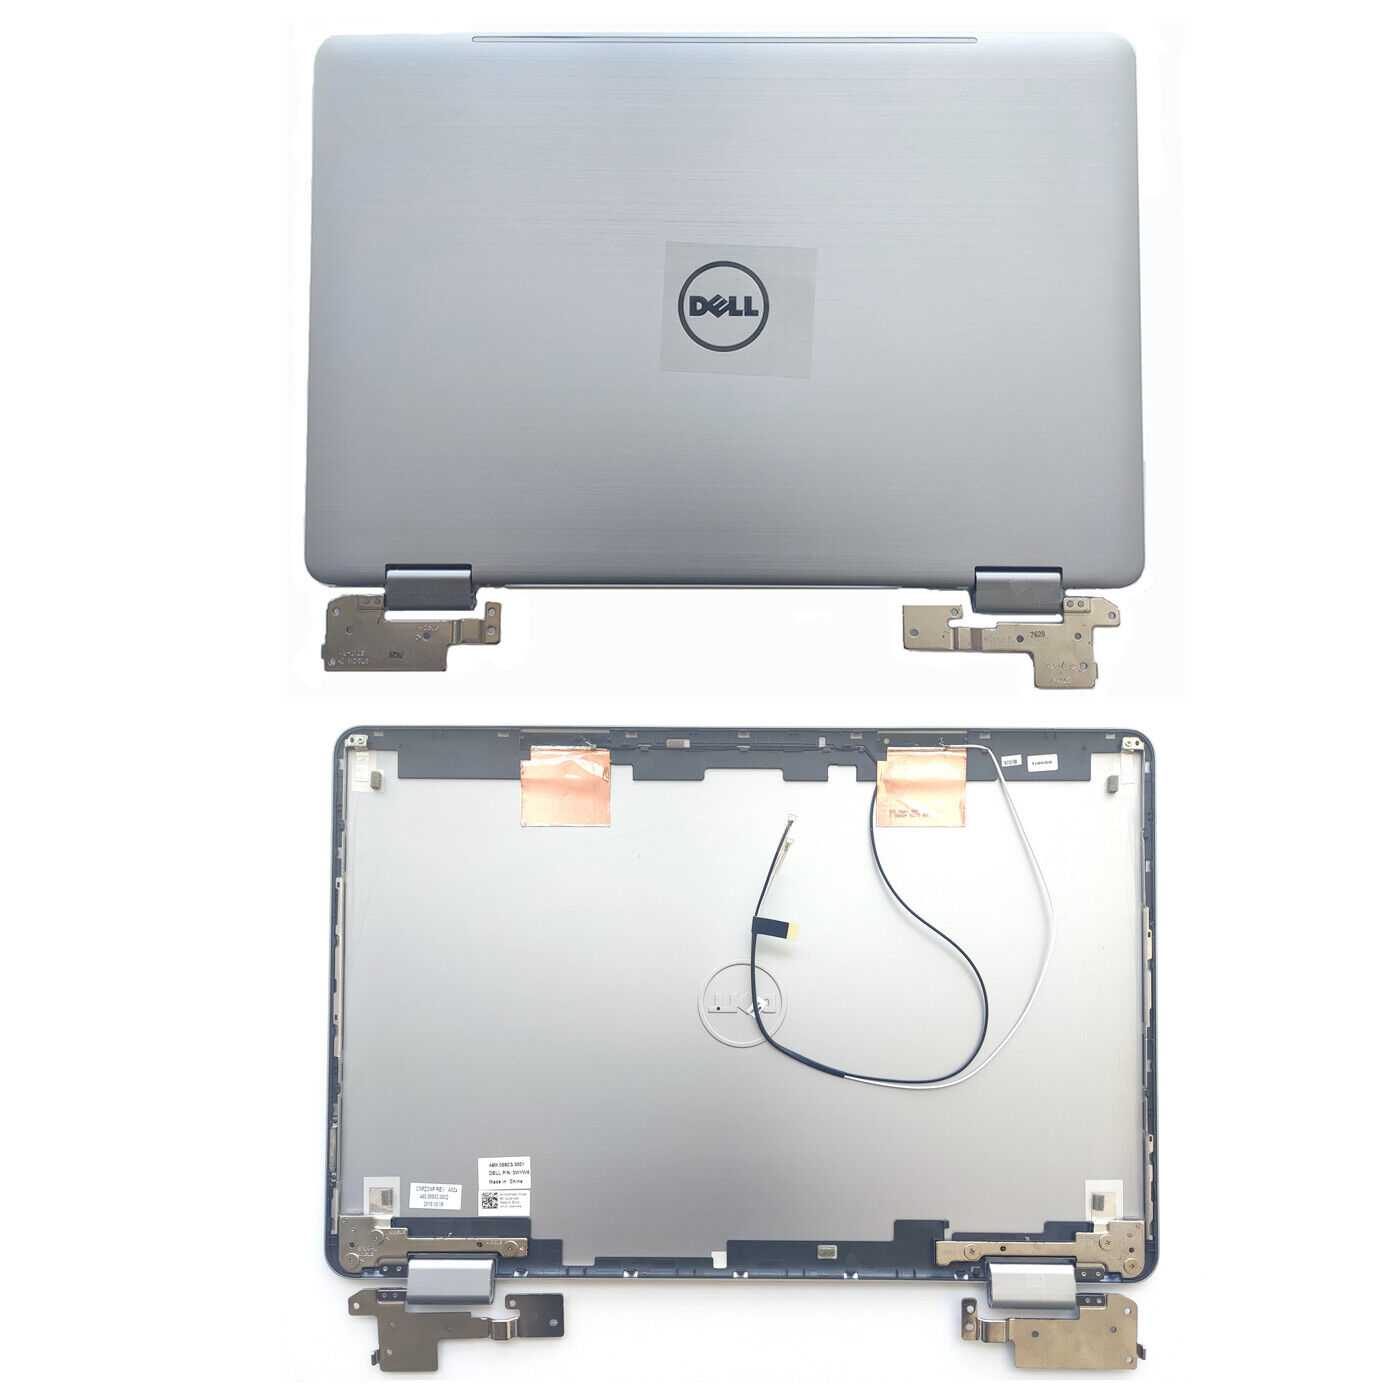 LCD Rear Top Lid Back Cover For Dell Inspiron 17 7773 7778 7779 6JVT4 3WYW6